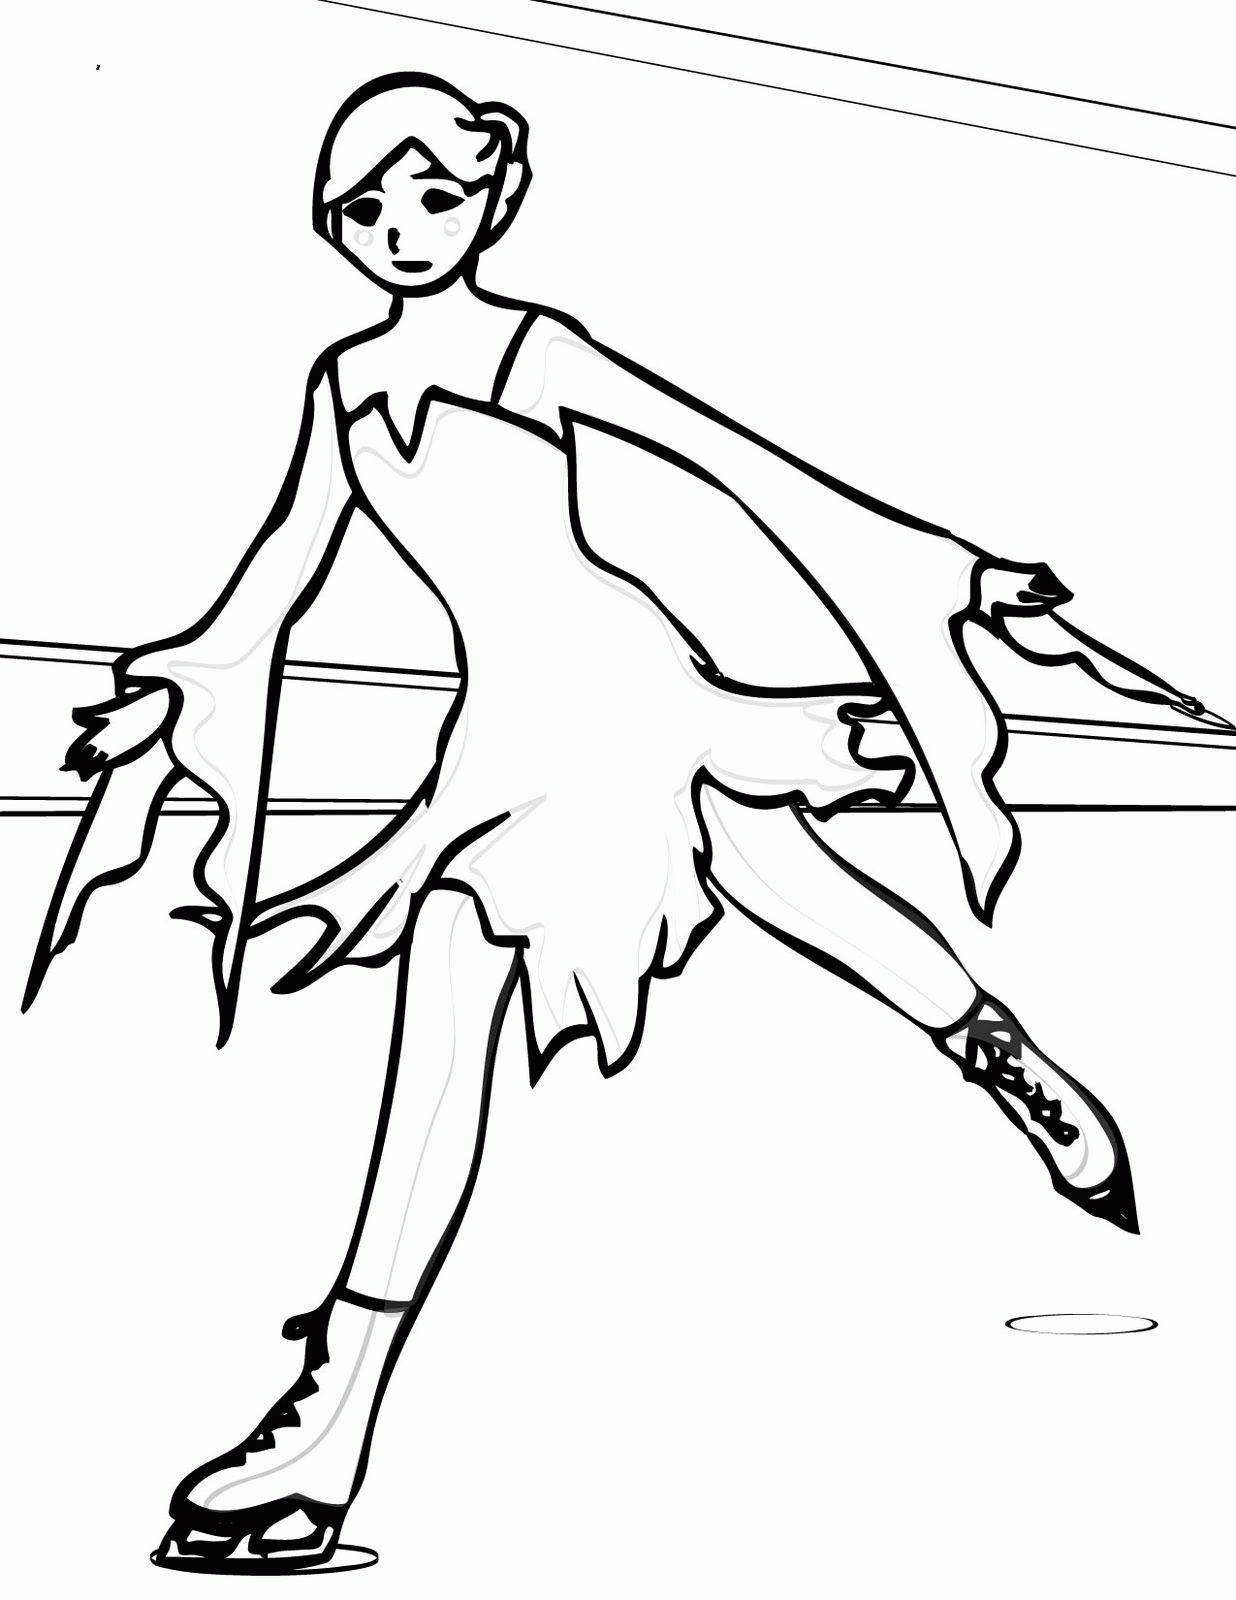 Olympic Figure Skating Coloring Pages - Coloring Page